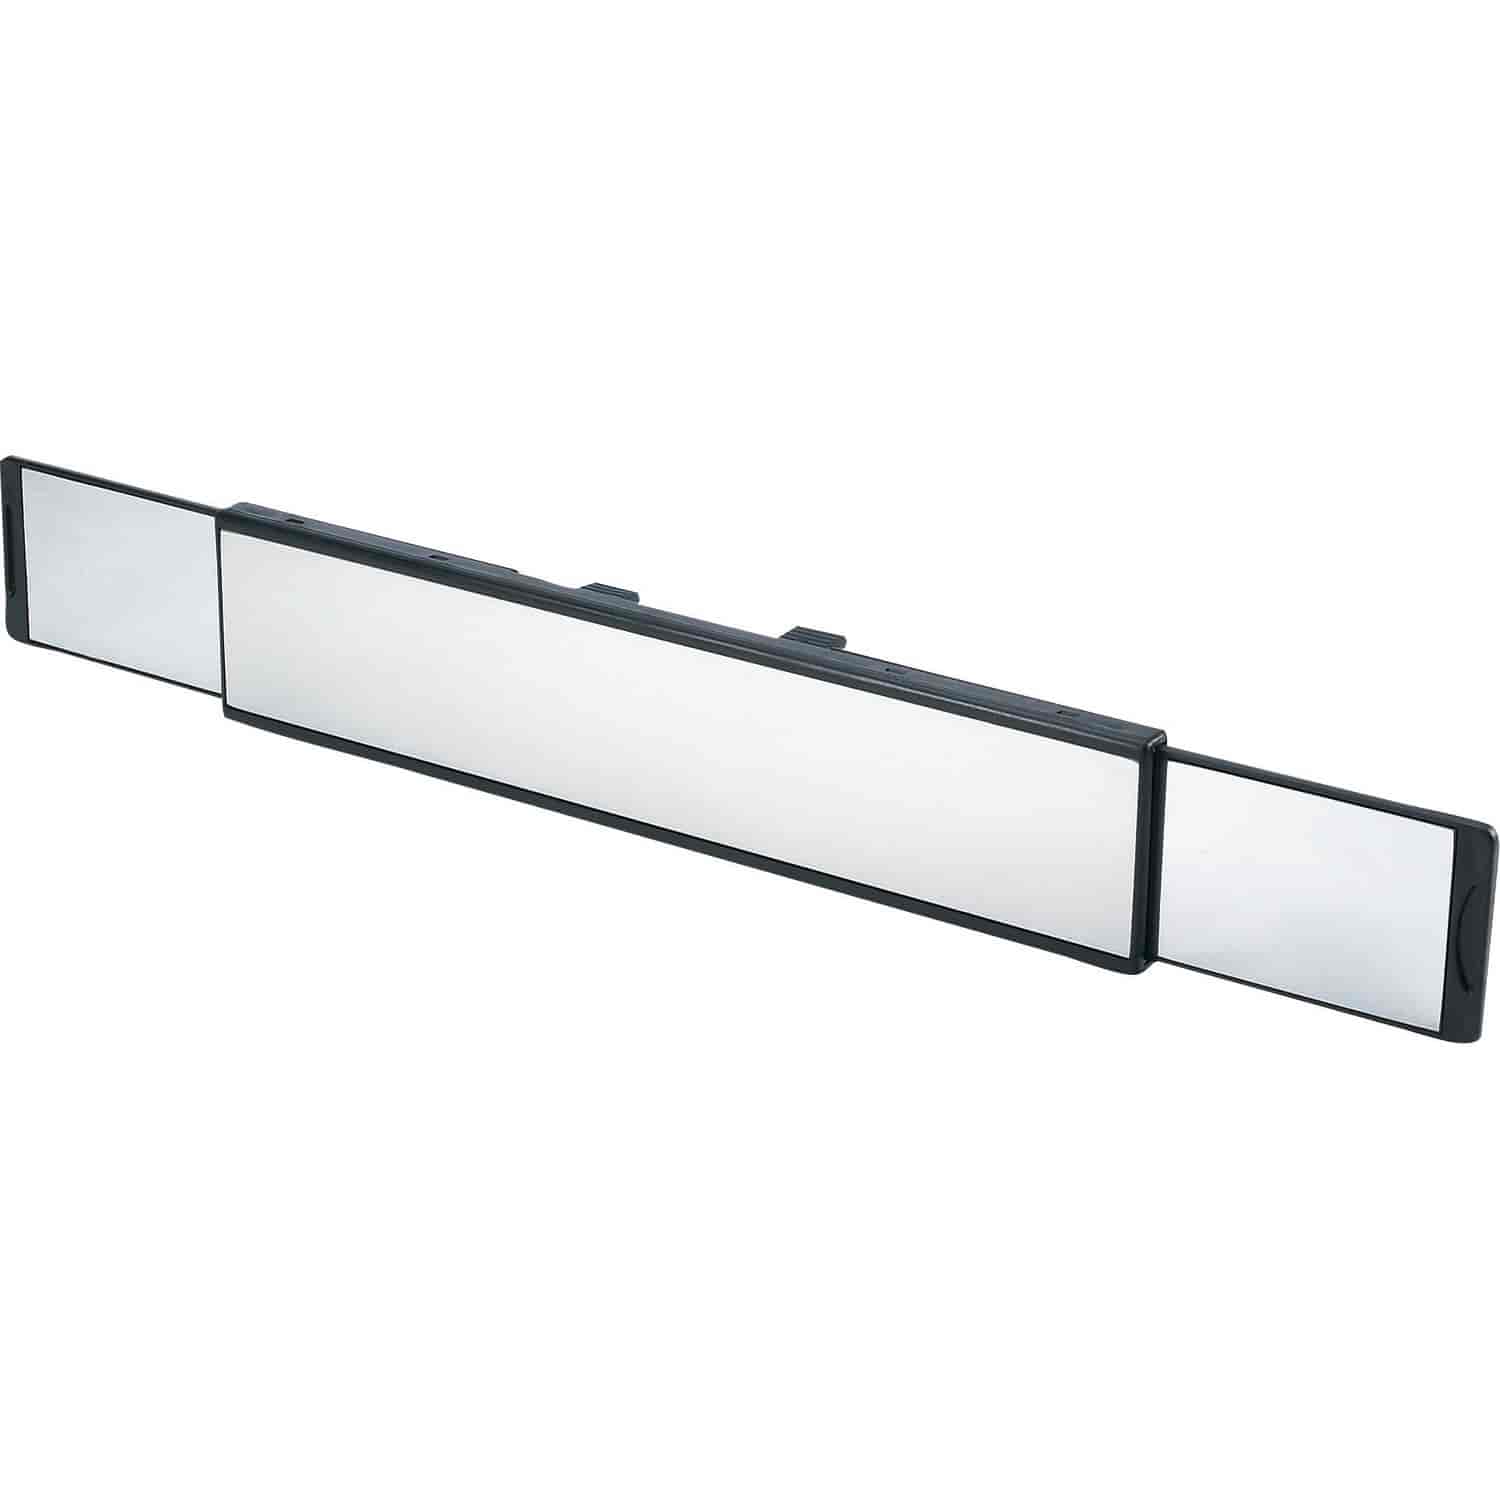 Rearview Mirror 13-3/4" to 21-1/2"